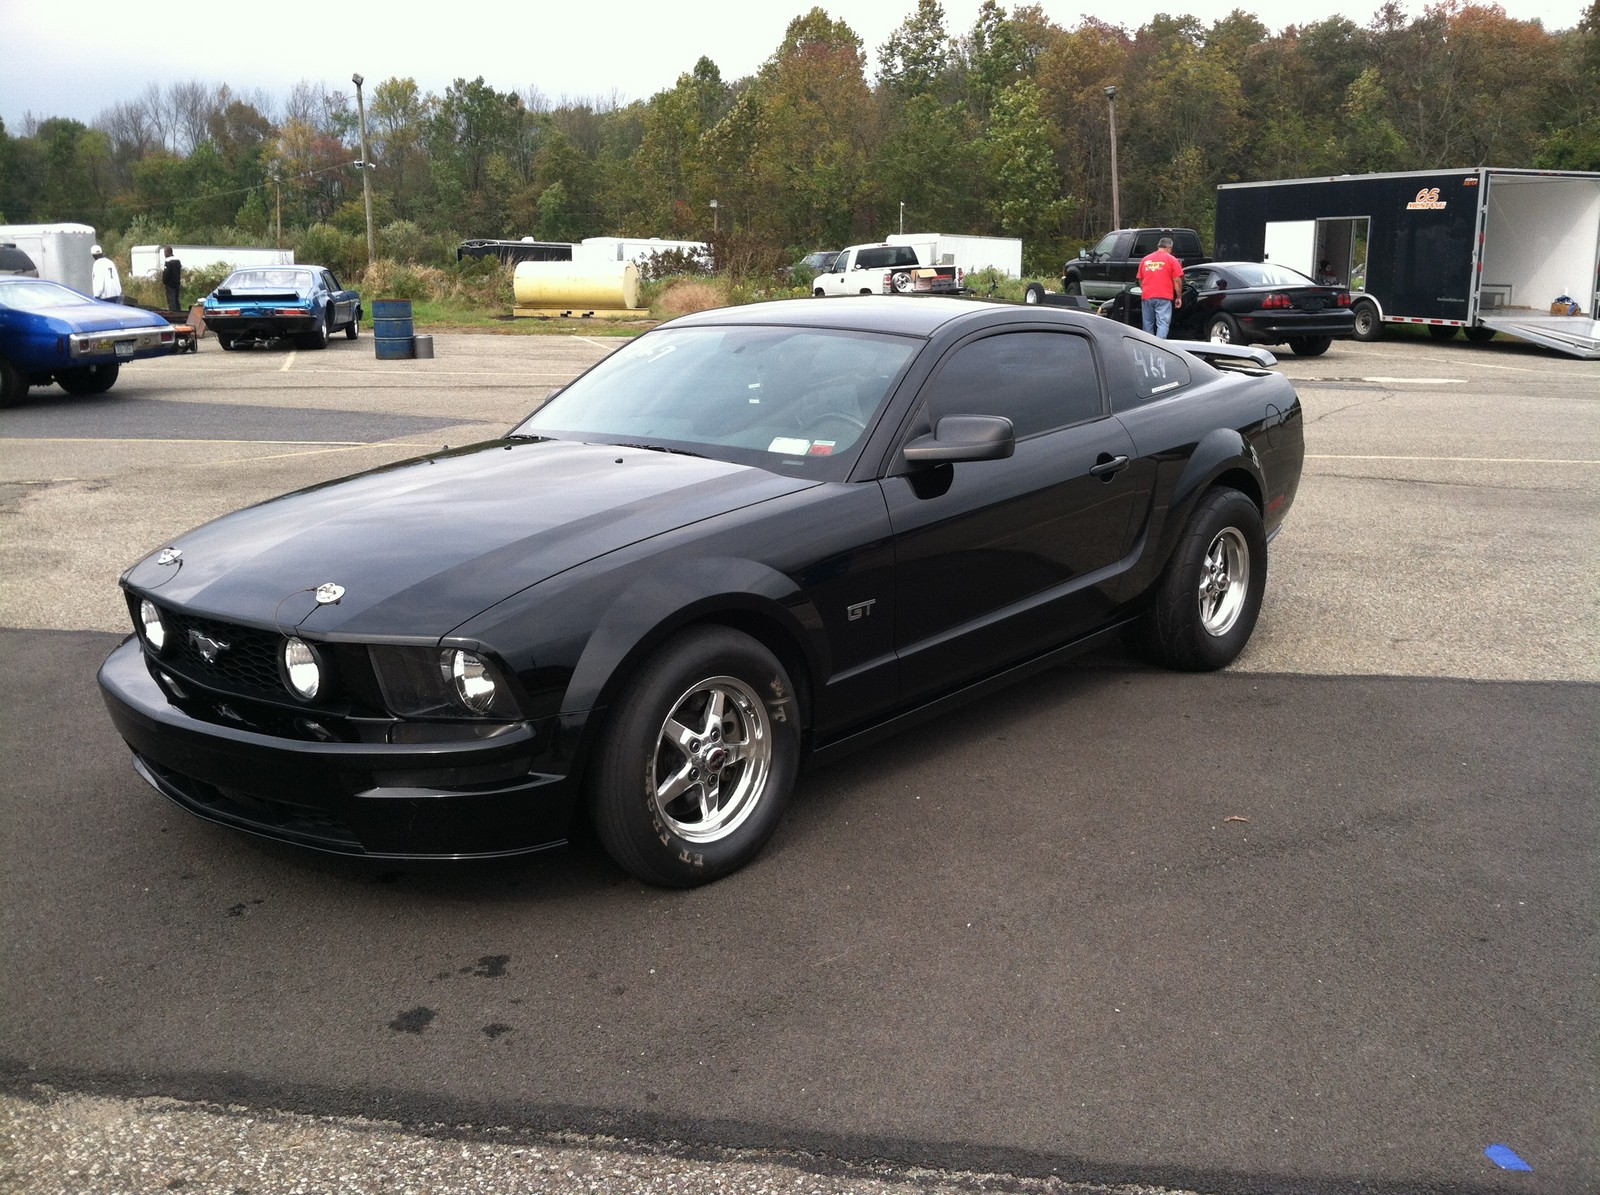 2006 Ford mustang gt 0-60 time #1